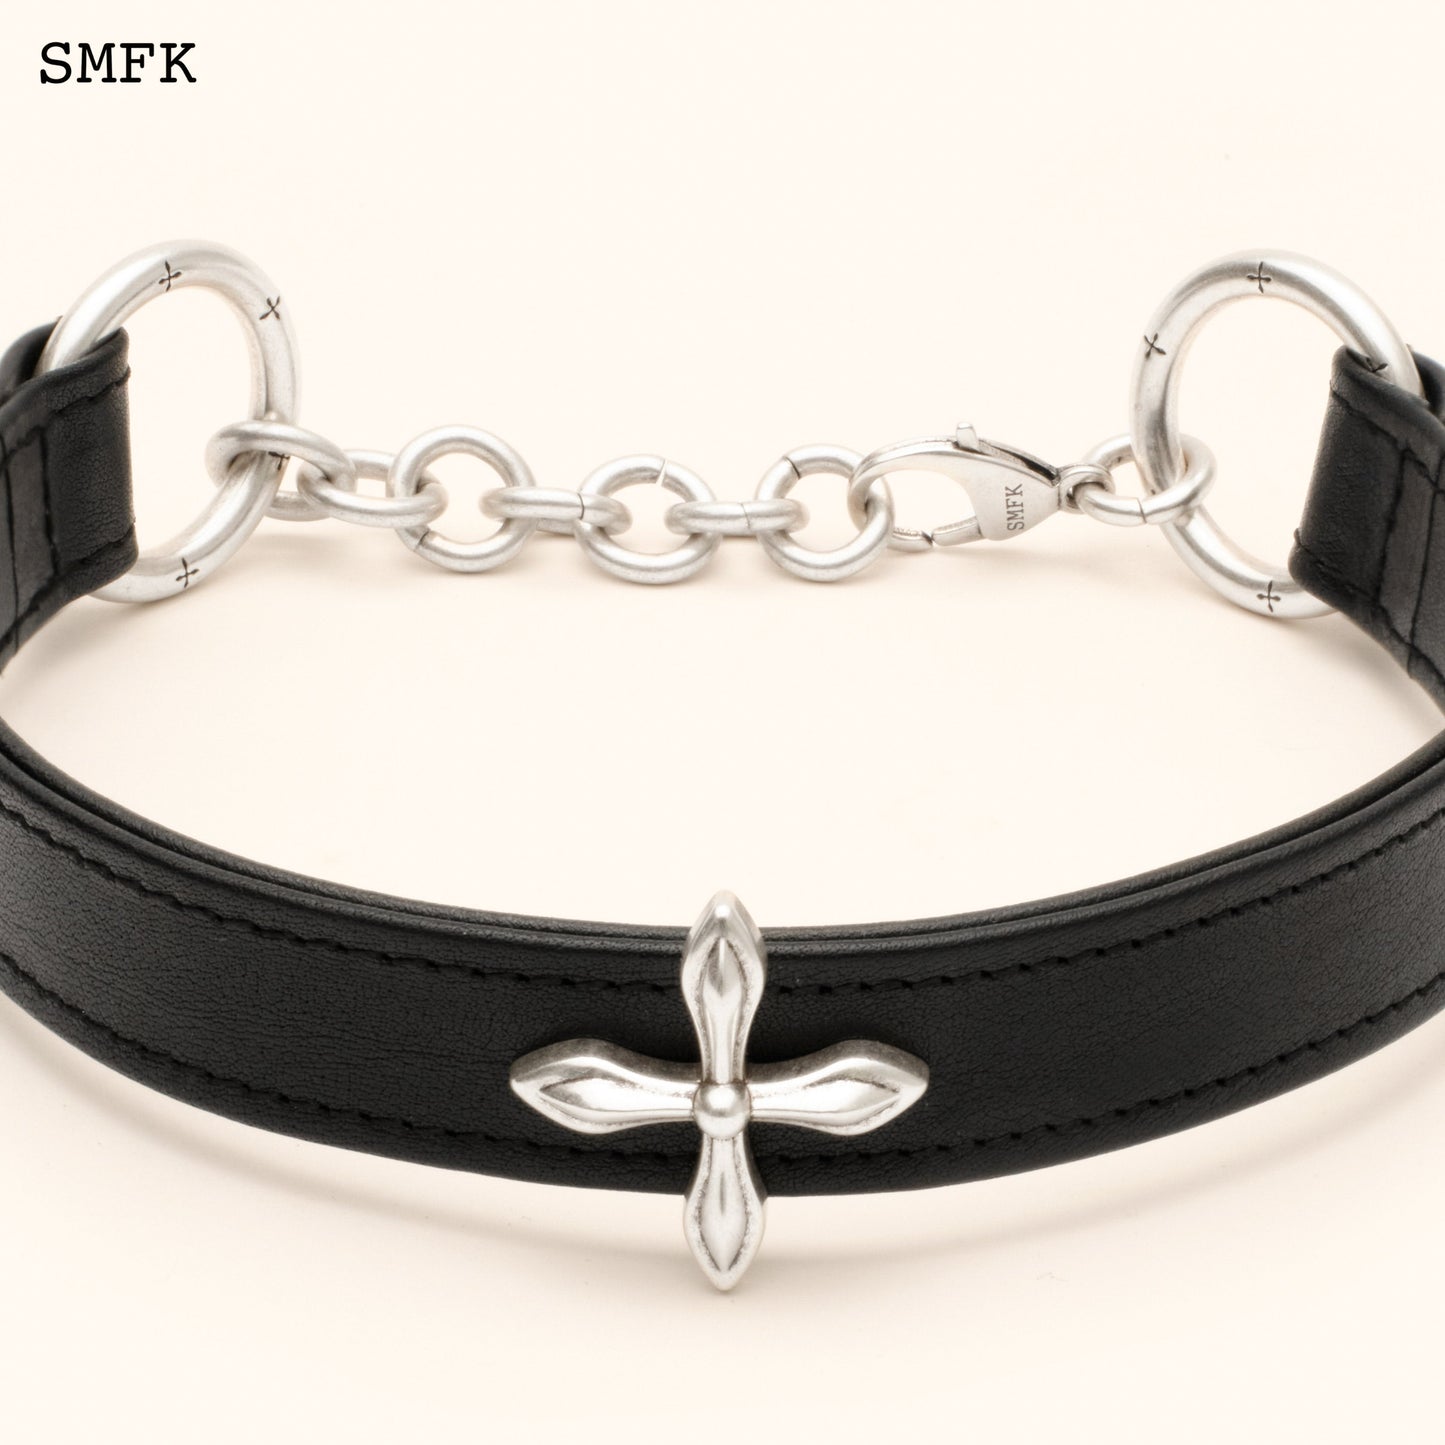 SMFK Compass Cross Leather Thick Choker In Black